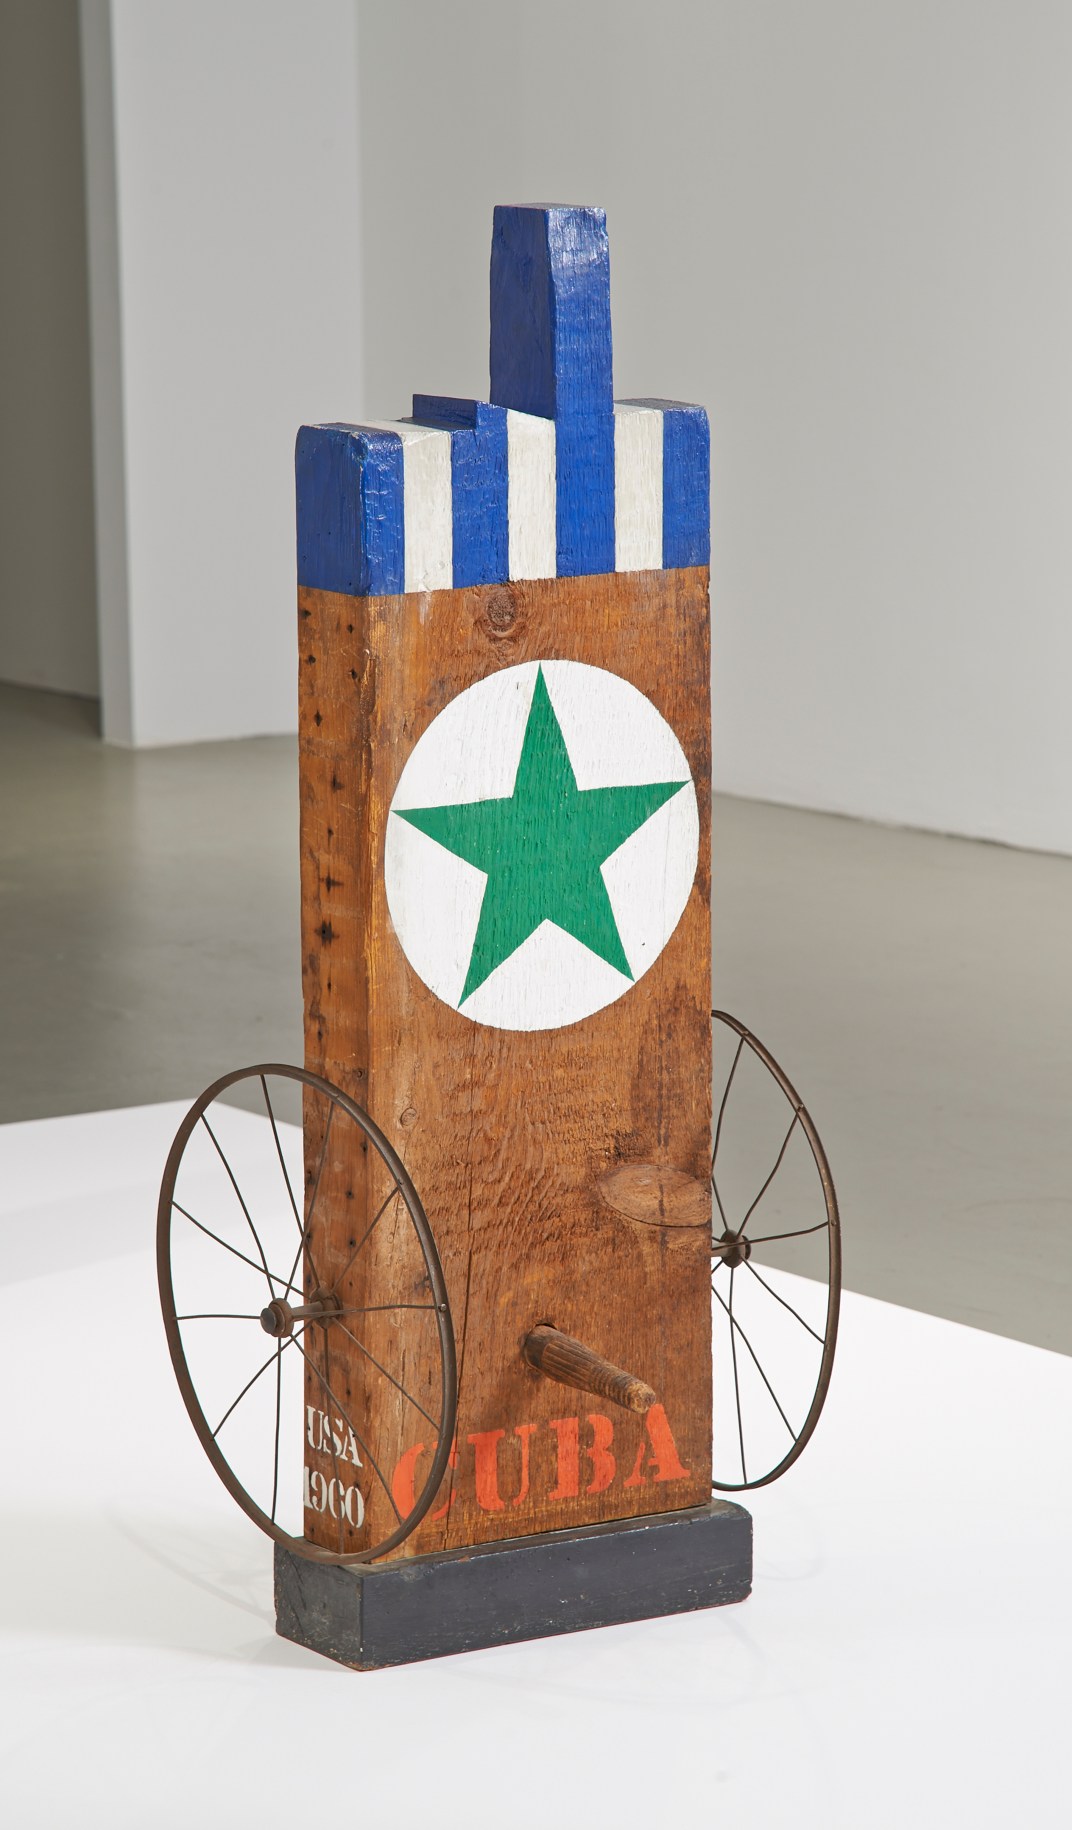 A 44 3/8 by 14 1/8 by 5 3/4 inch sculpture consisting of a wooden beam with a haunched tenon, standing on a wooden base. The work's title, Cuba, is painted in red letters across the bottom of the plank. Above it is a wooden peg, and to each side is an iron wheel. A green star in a white circle is found in the upper half of the sculpture, and above this the top part of the sculpture, including the tenon, is painted in blue and white vertical stripes.